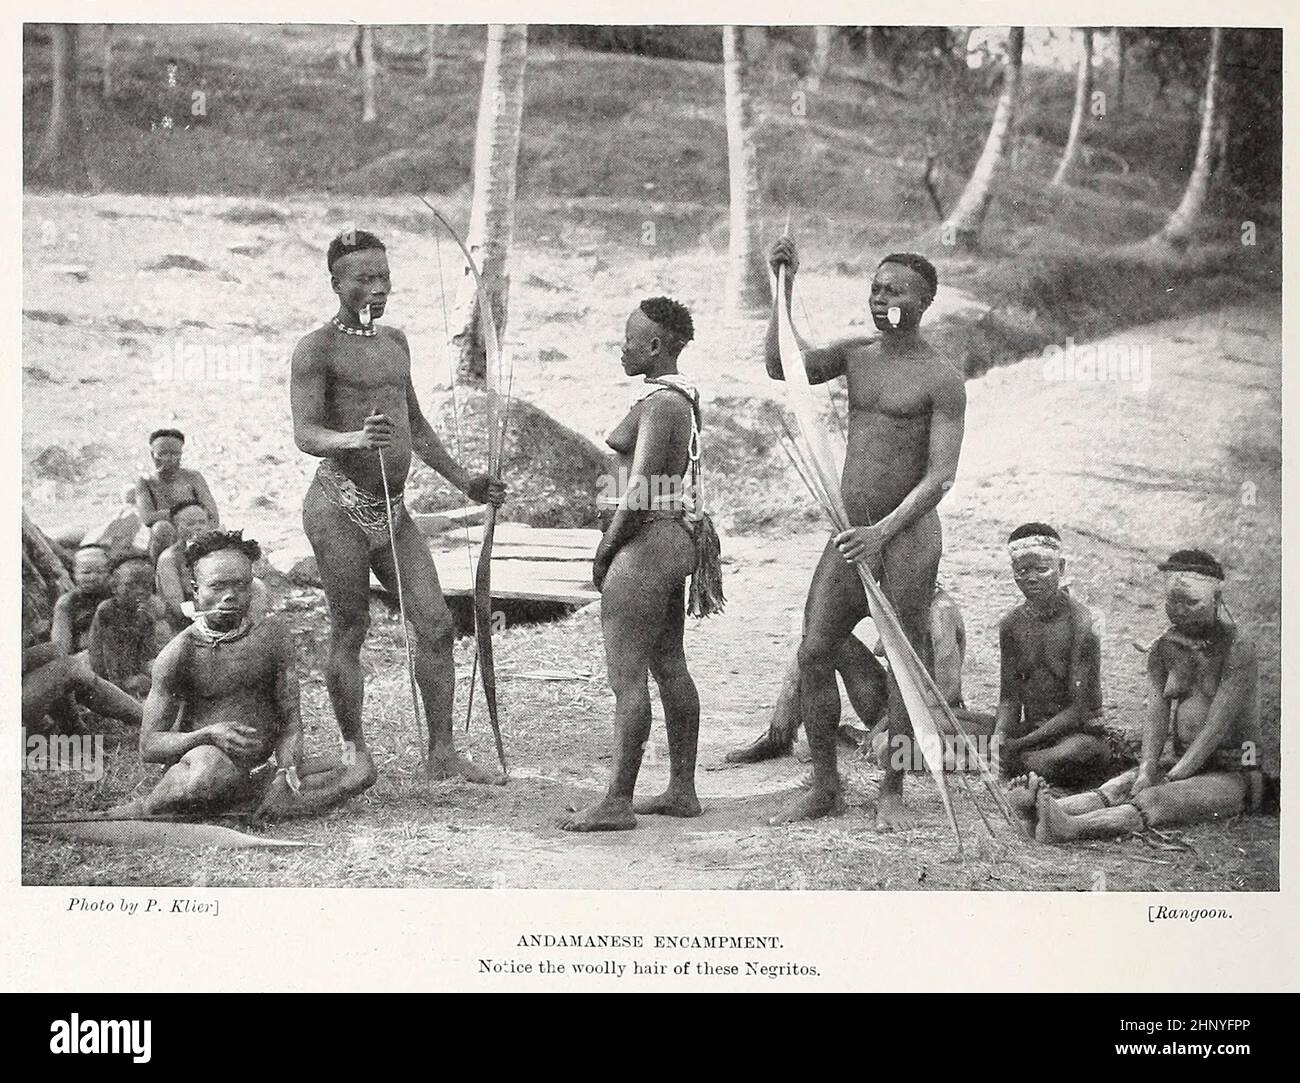 Andamanese encampment The Andamanese are the various indigenous peoples of the Andaman Islands, part of India's Andaman and Nicobar Islands union territory in the southeastern part of the Bay of Bengal in Southeast Asia. The Andamanese peoples are among the various groups considered Negrito, owing to their dark skin and diminutive stature. All Andamanese traditionally lived a hunter-gatherer lifestyle, and appear to have lived in substantial isolation for thousands of years. It is suggested that the Andamanese settled in the Andaman Islands around the latest glacial maximum, around 26,000 year Stock Photo